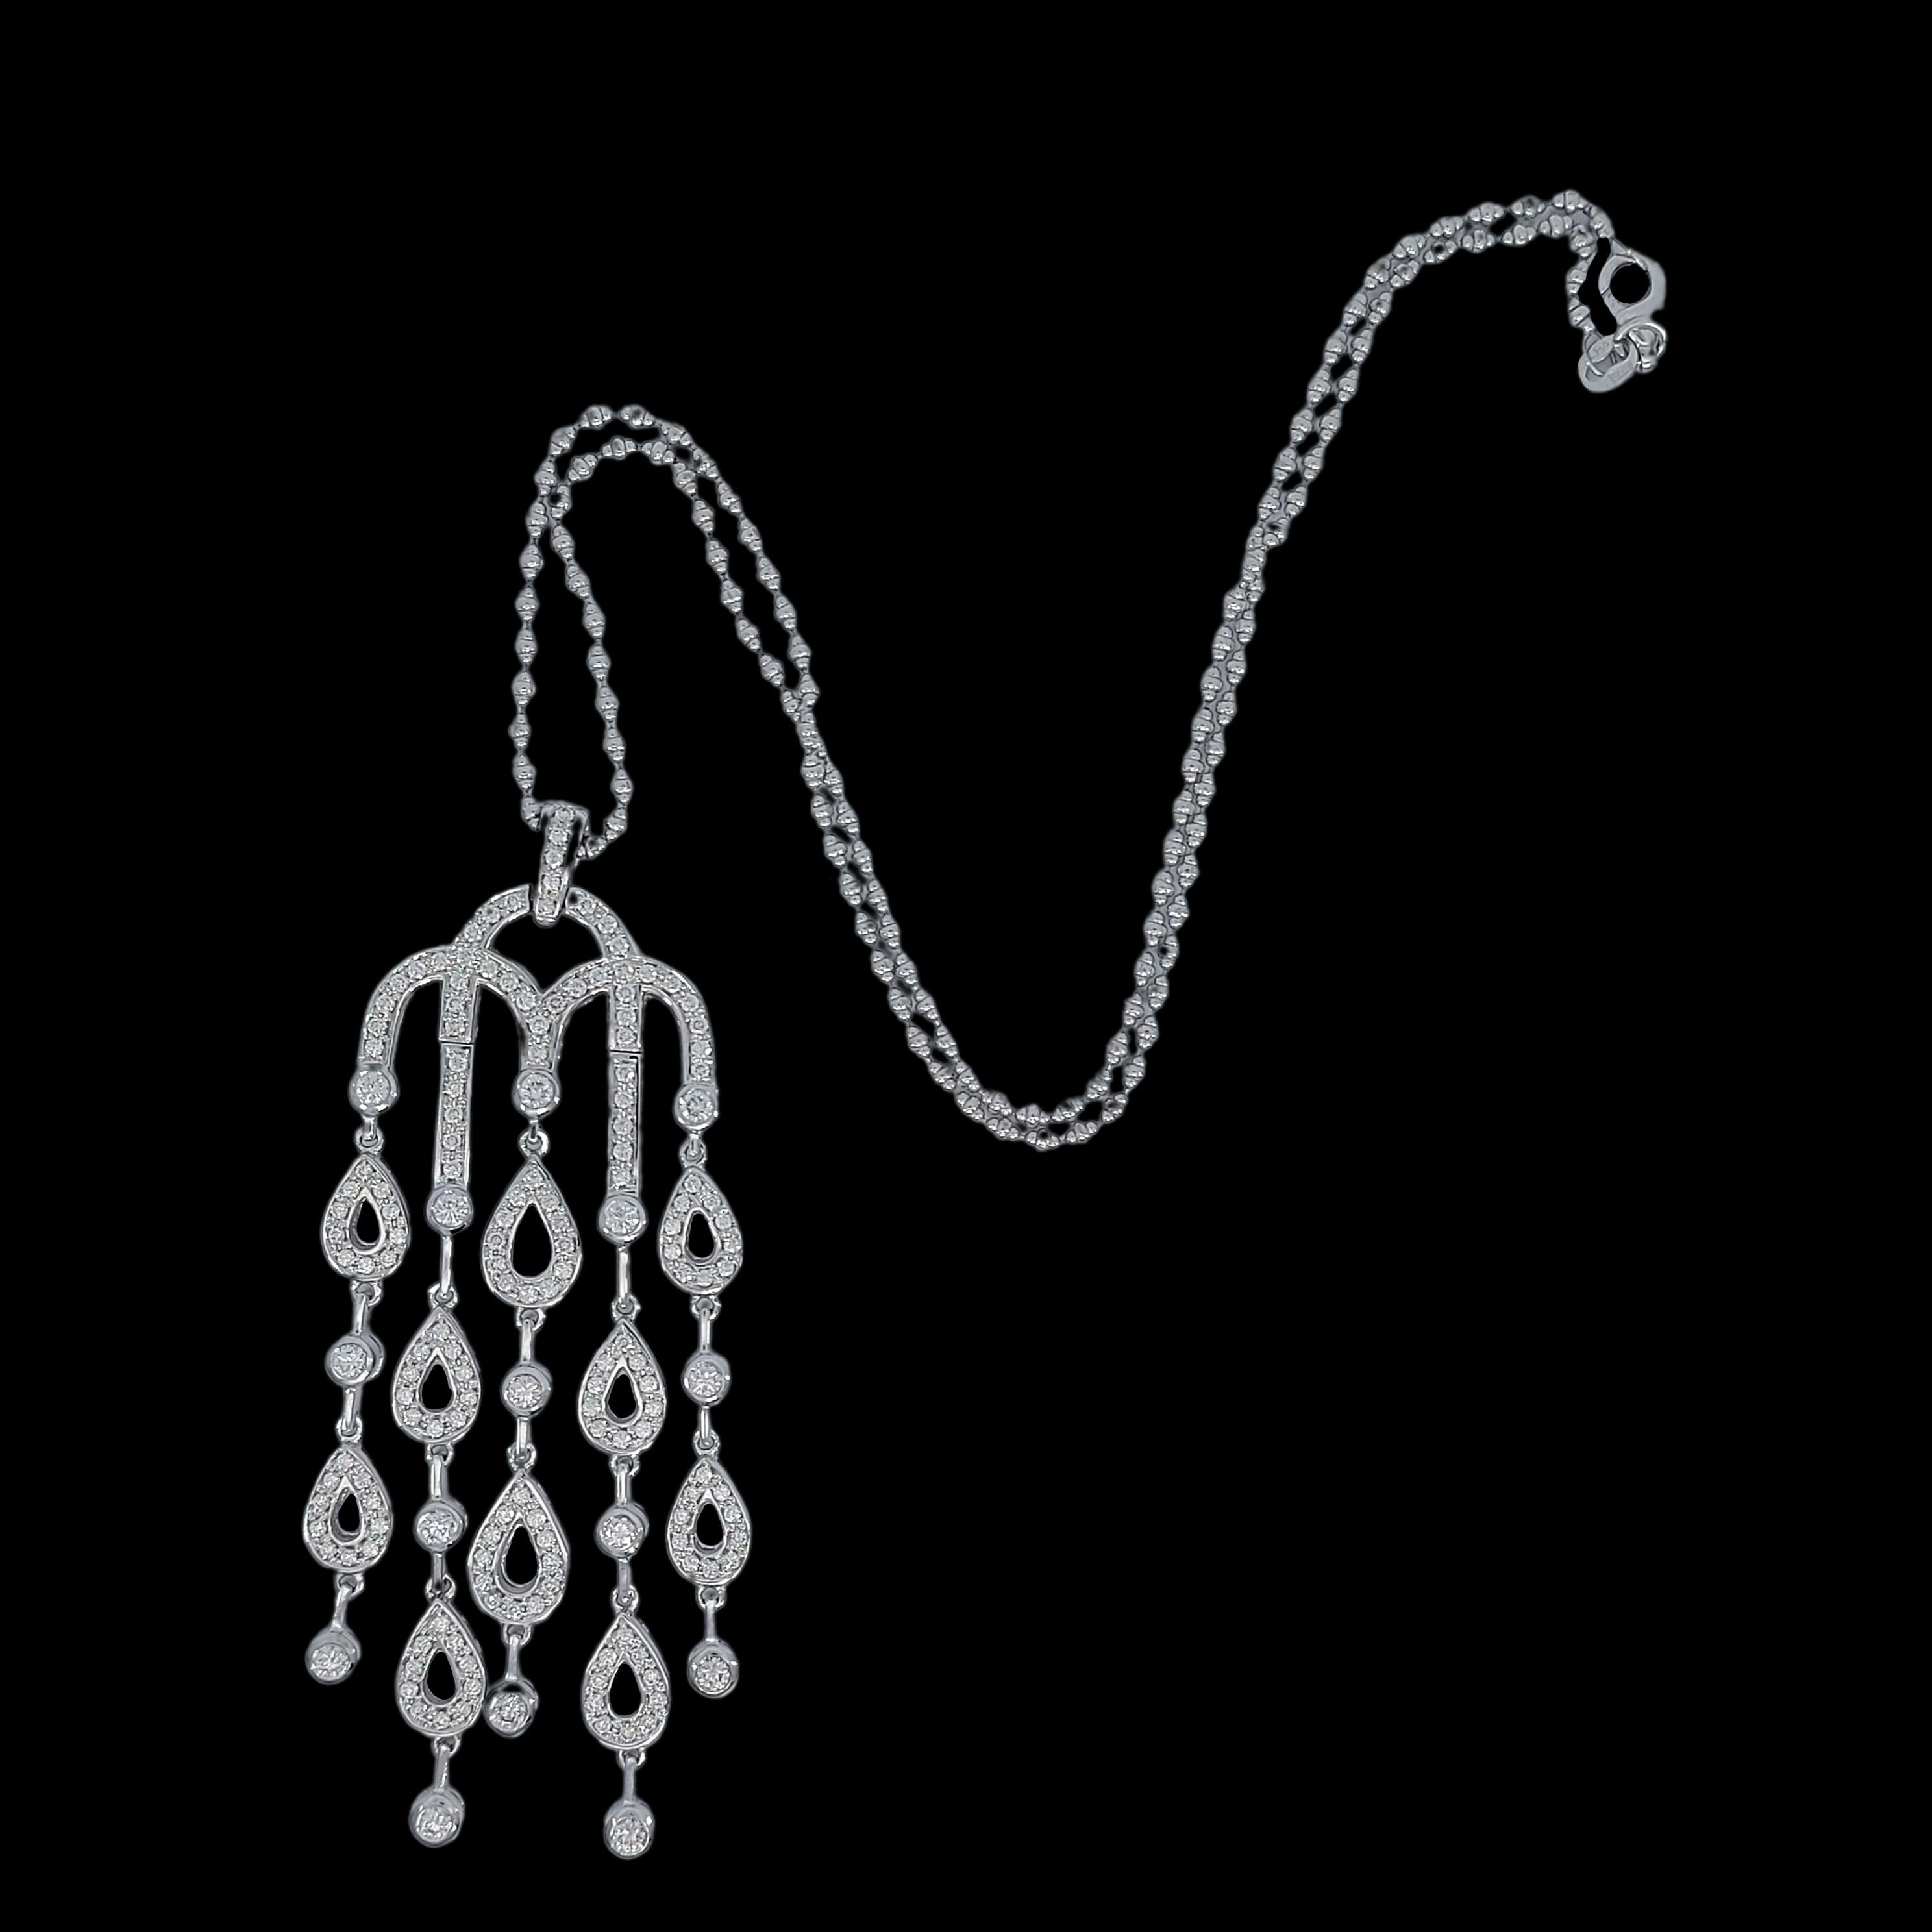 Dangling Chandelier 18kt White Gold Necklace with 5.4ct Diamonds For Sale 7